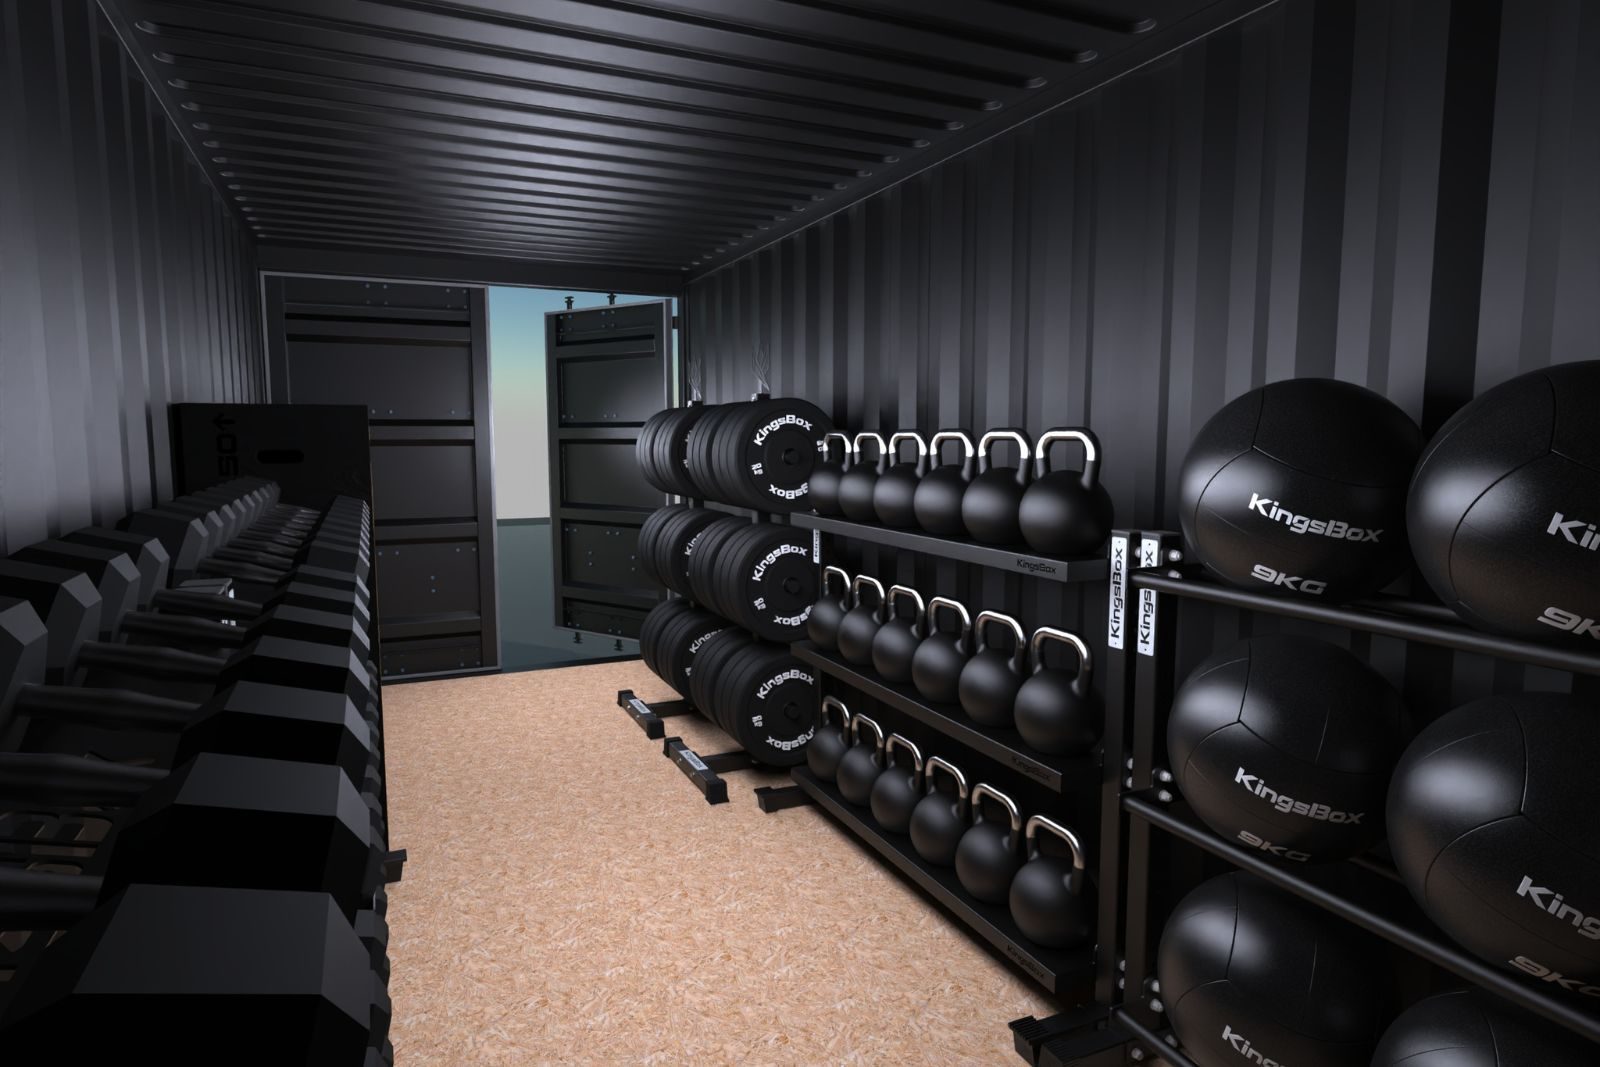 KingsBox Gym in Storage Container for 12 persons | KingsBox